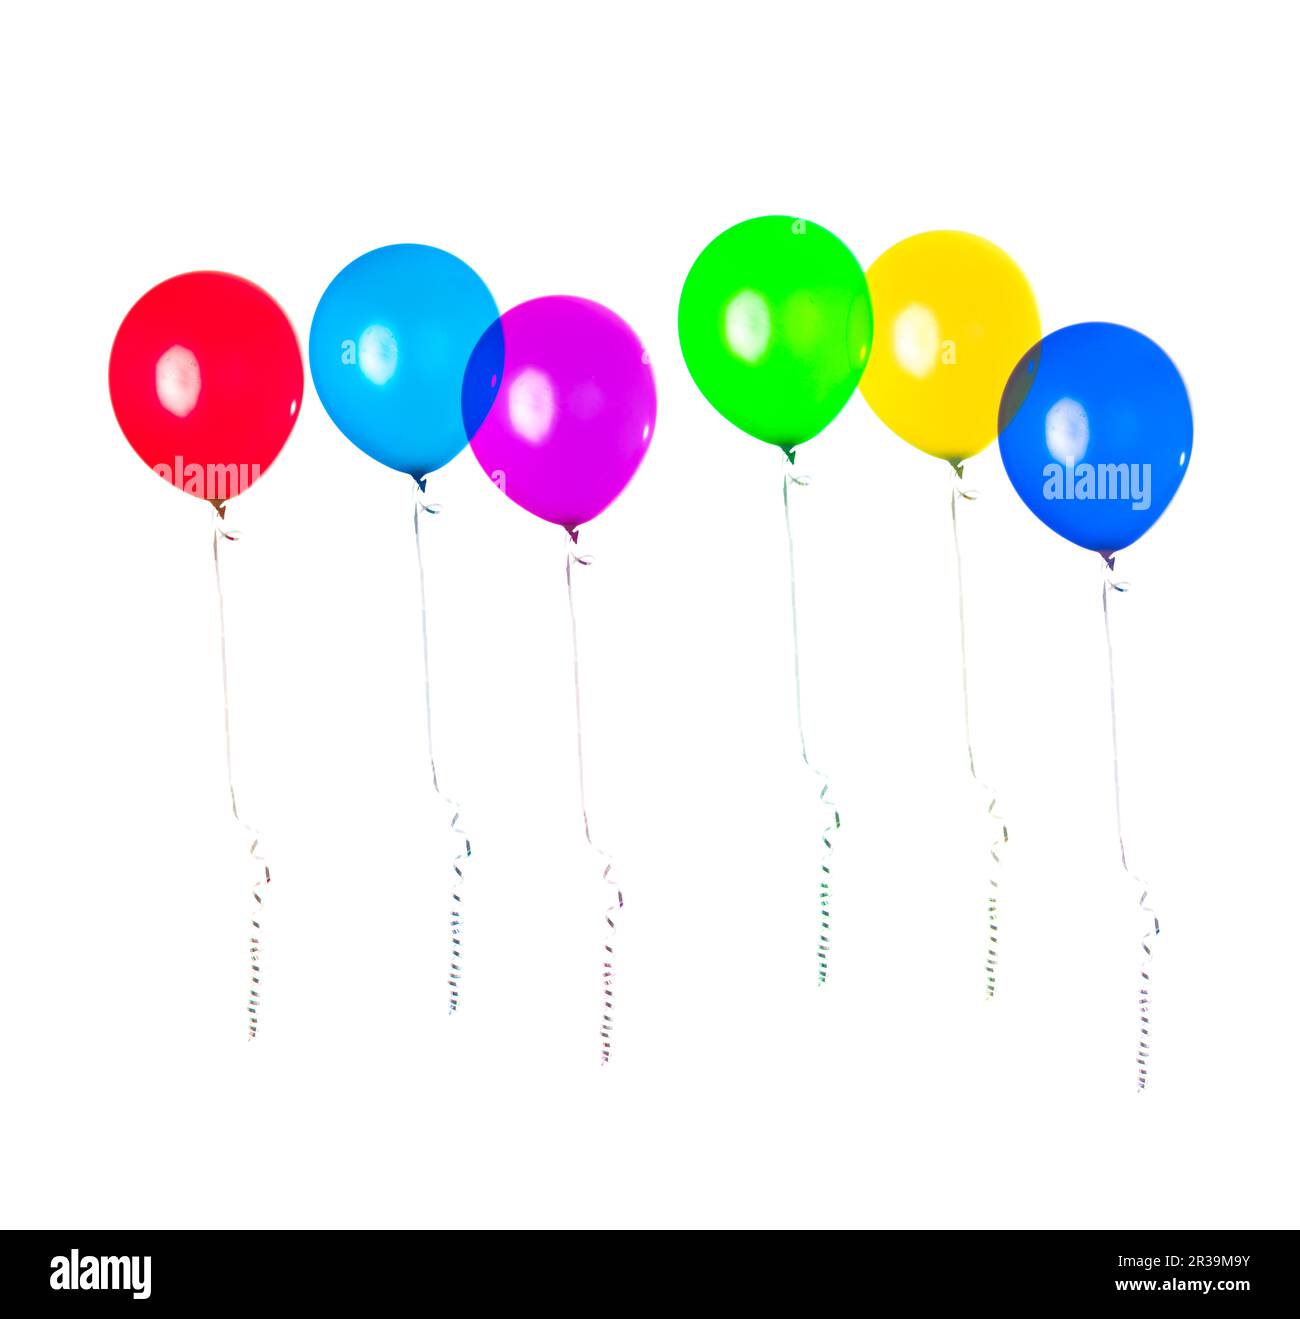 Row of party balloons hanging in the air on white background. Birthday decoration. Stock Photo